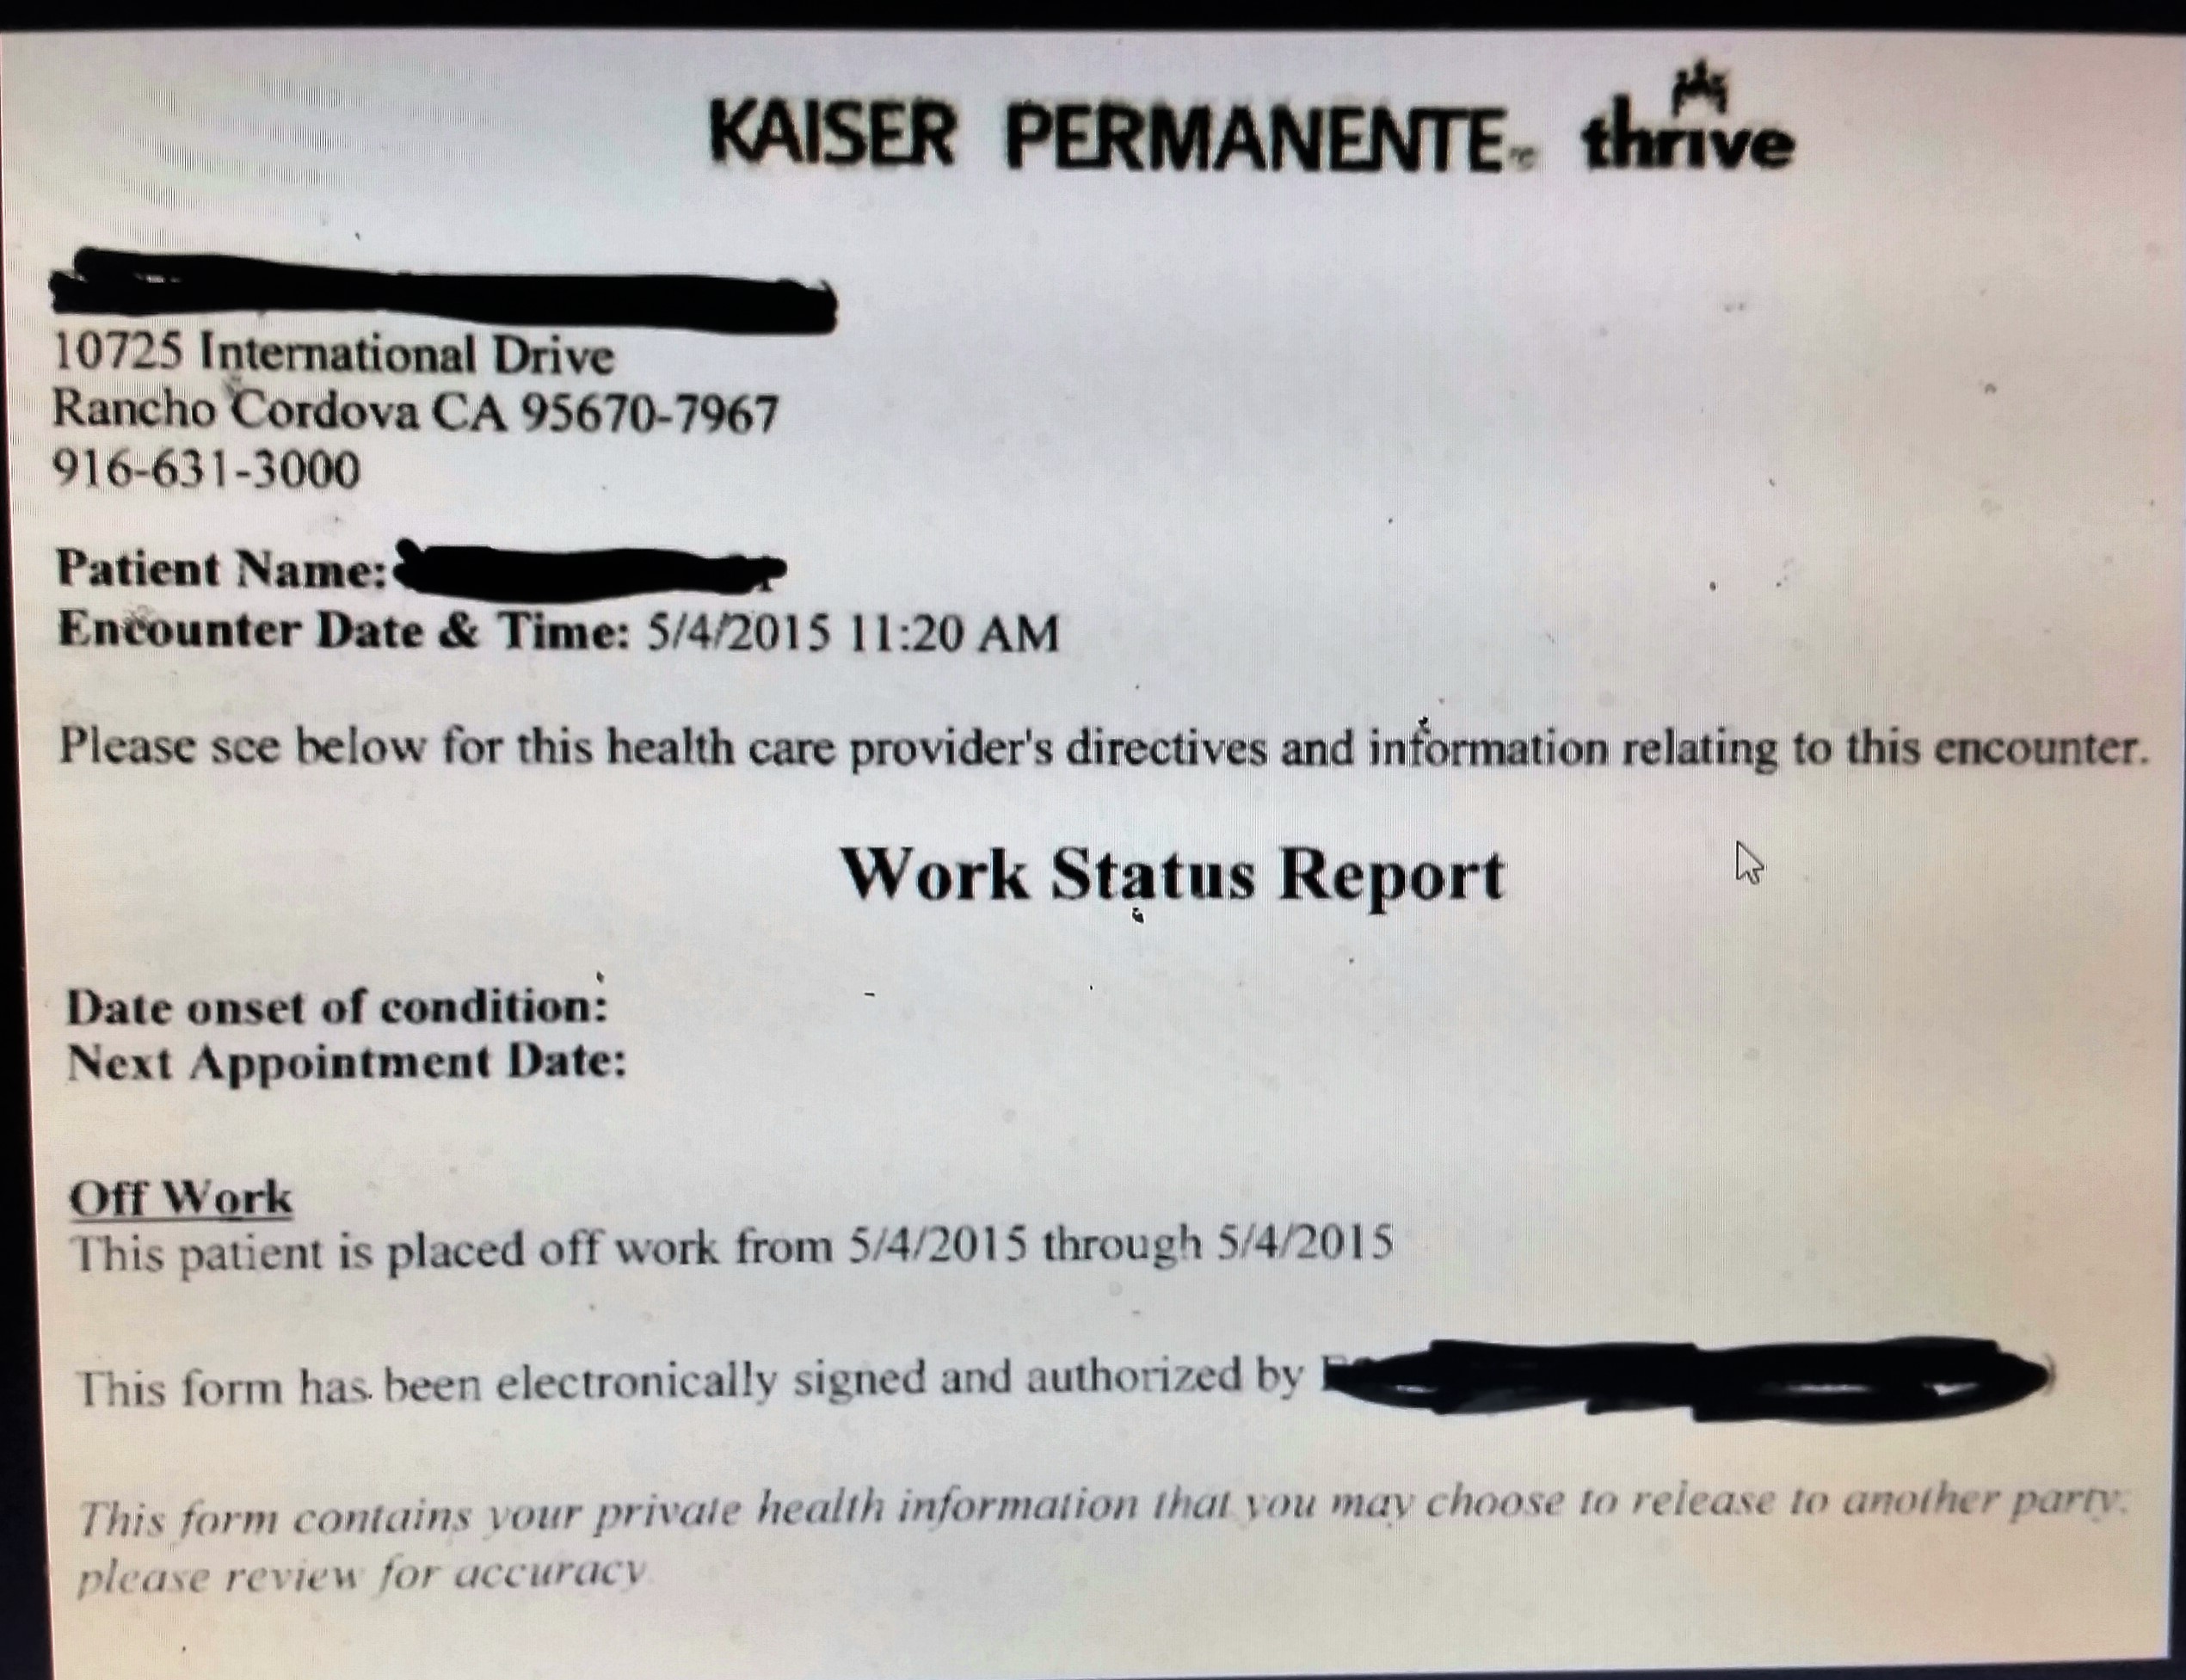 Work Status Report Note And ADA Protection (Disability Law) With Kaiser Permanente Doctors Note Template